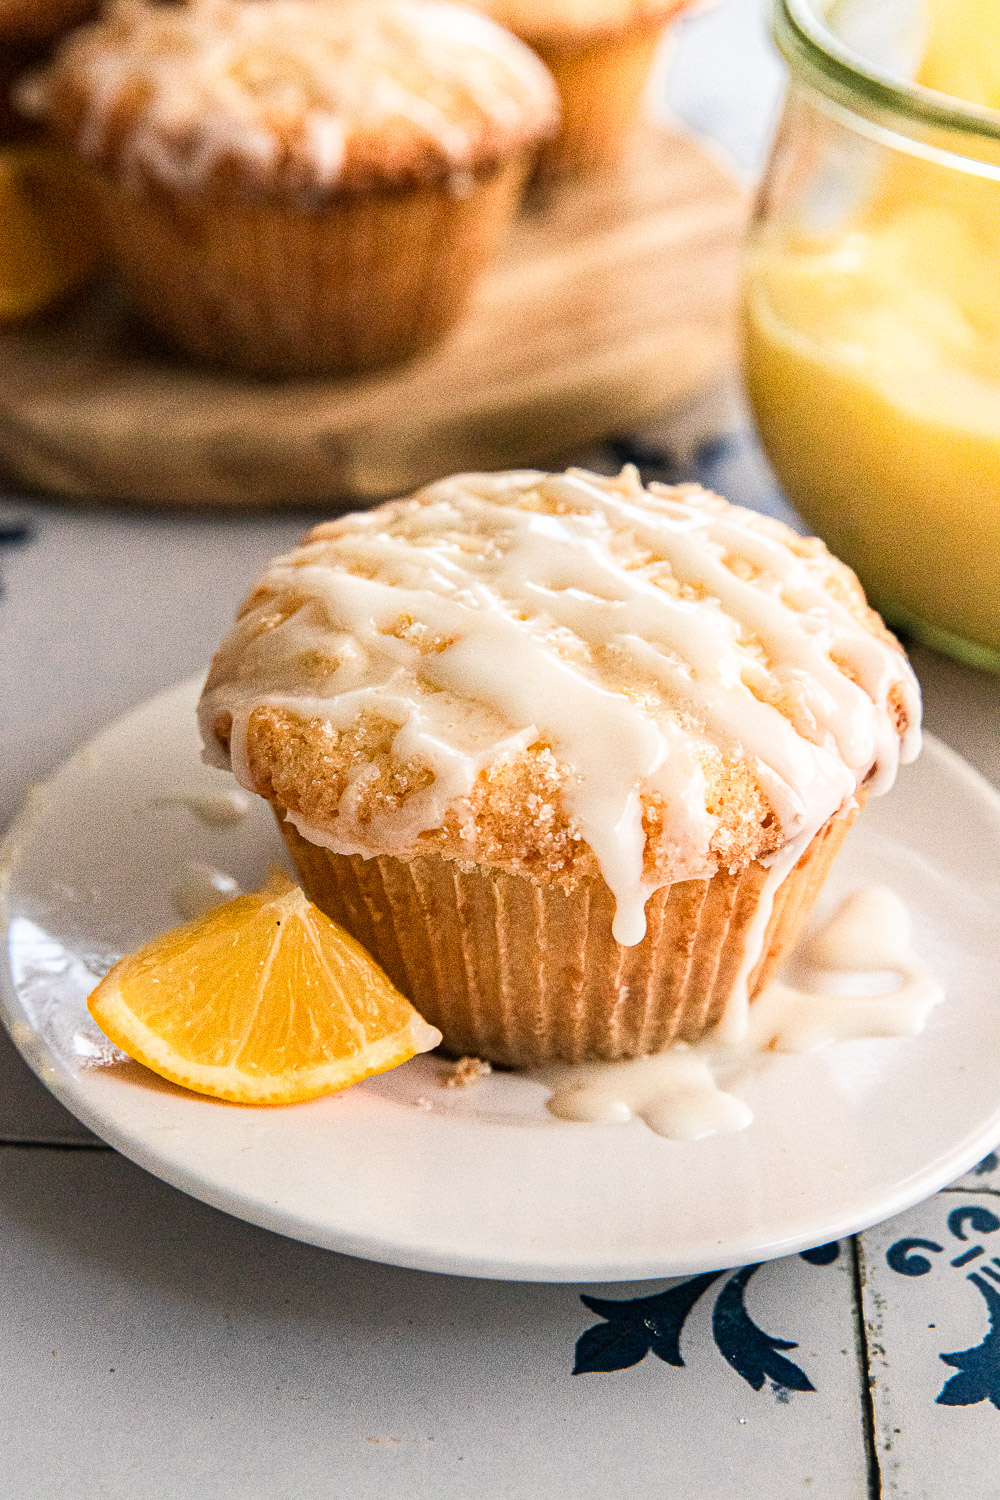 A lemon curd muffin on a plate with a wedge of lemon.